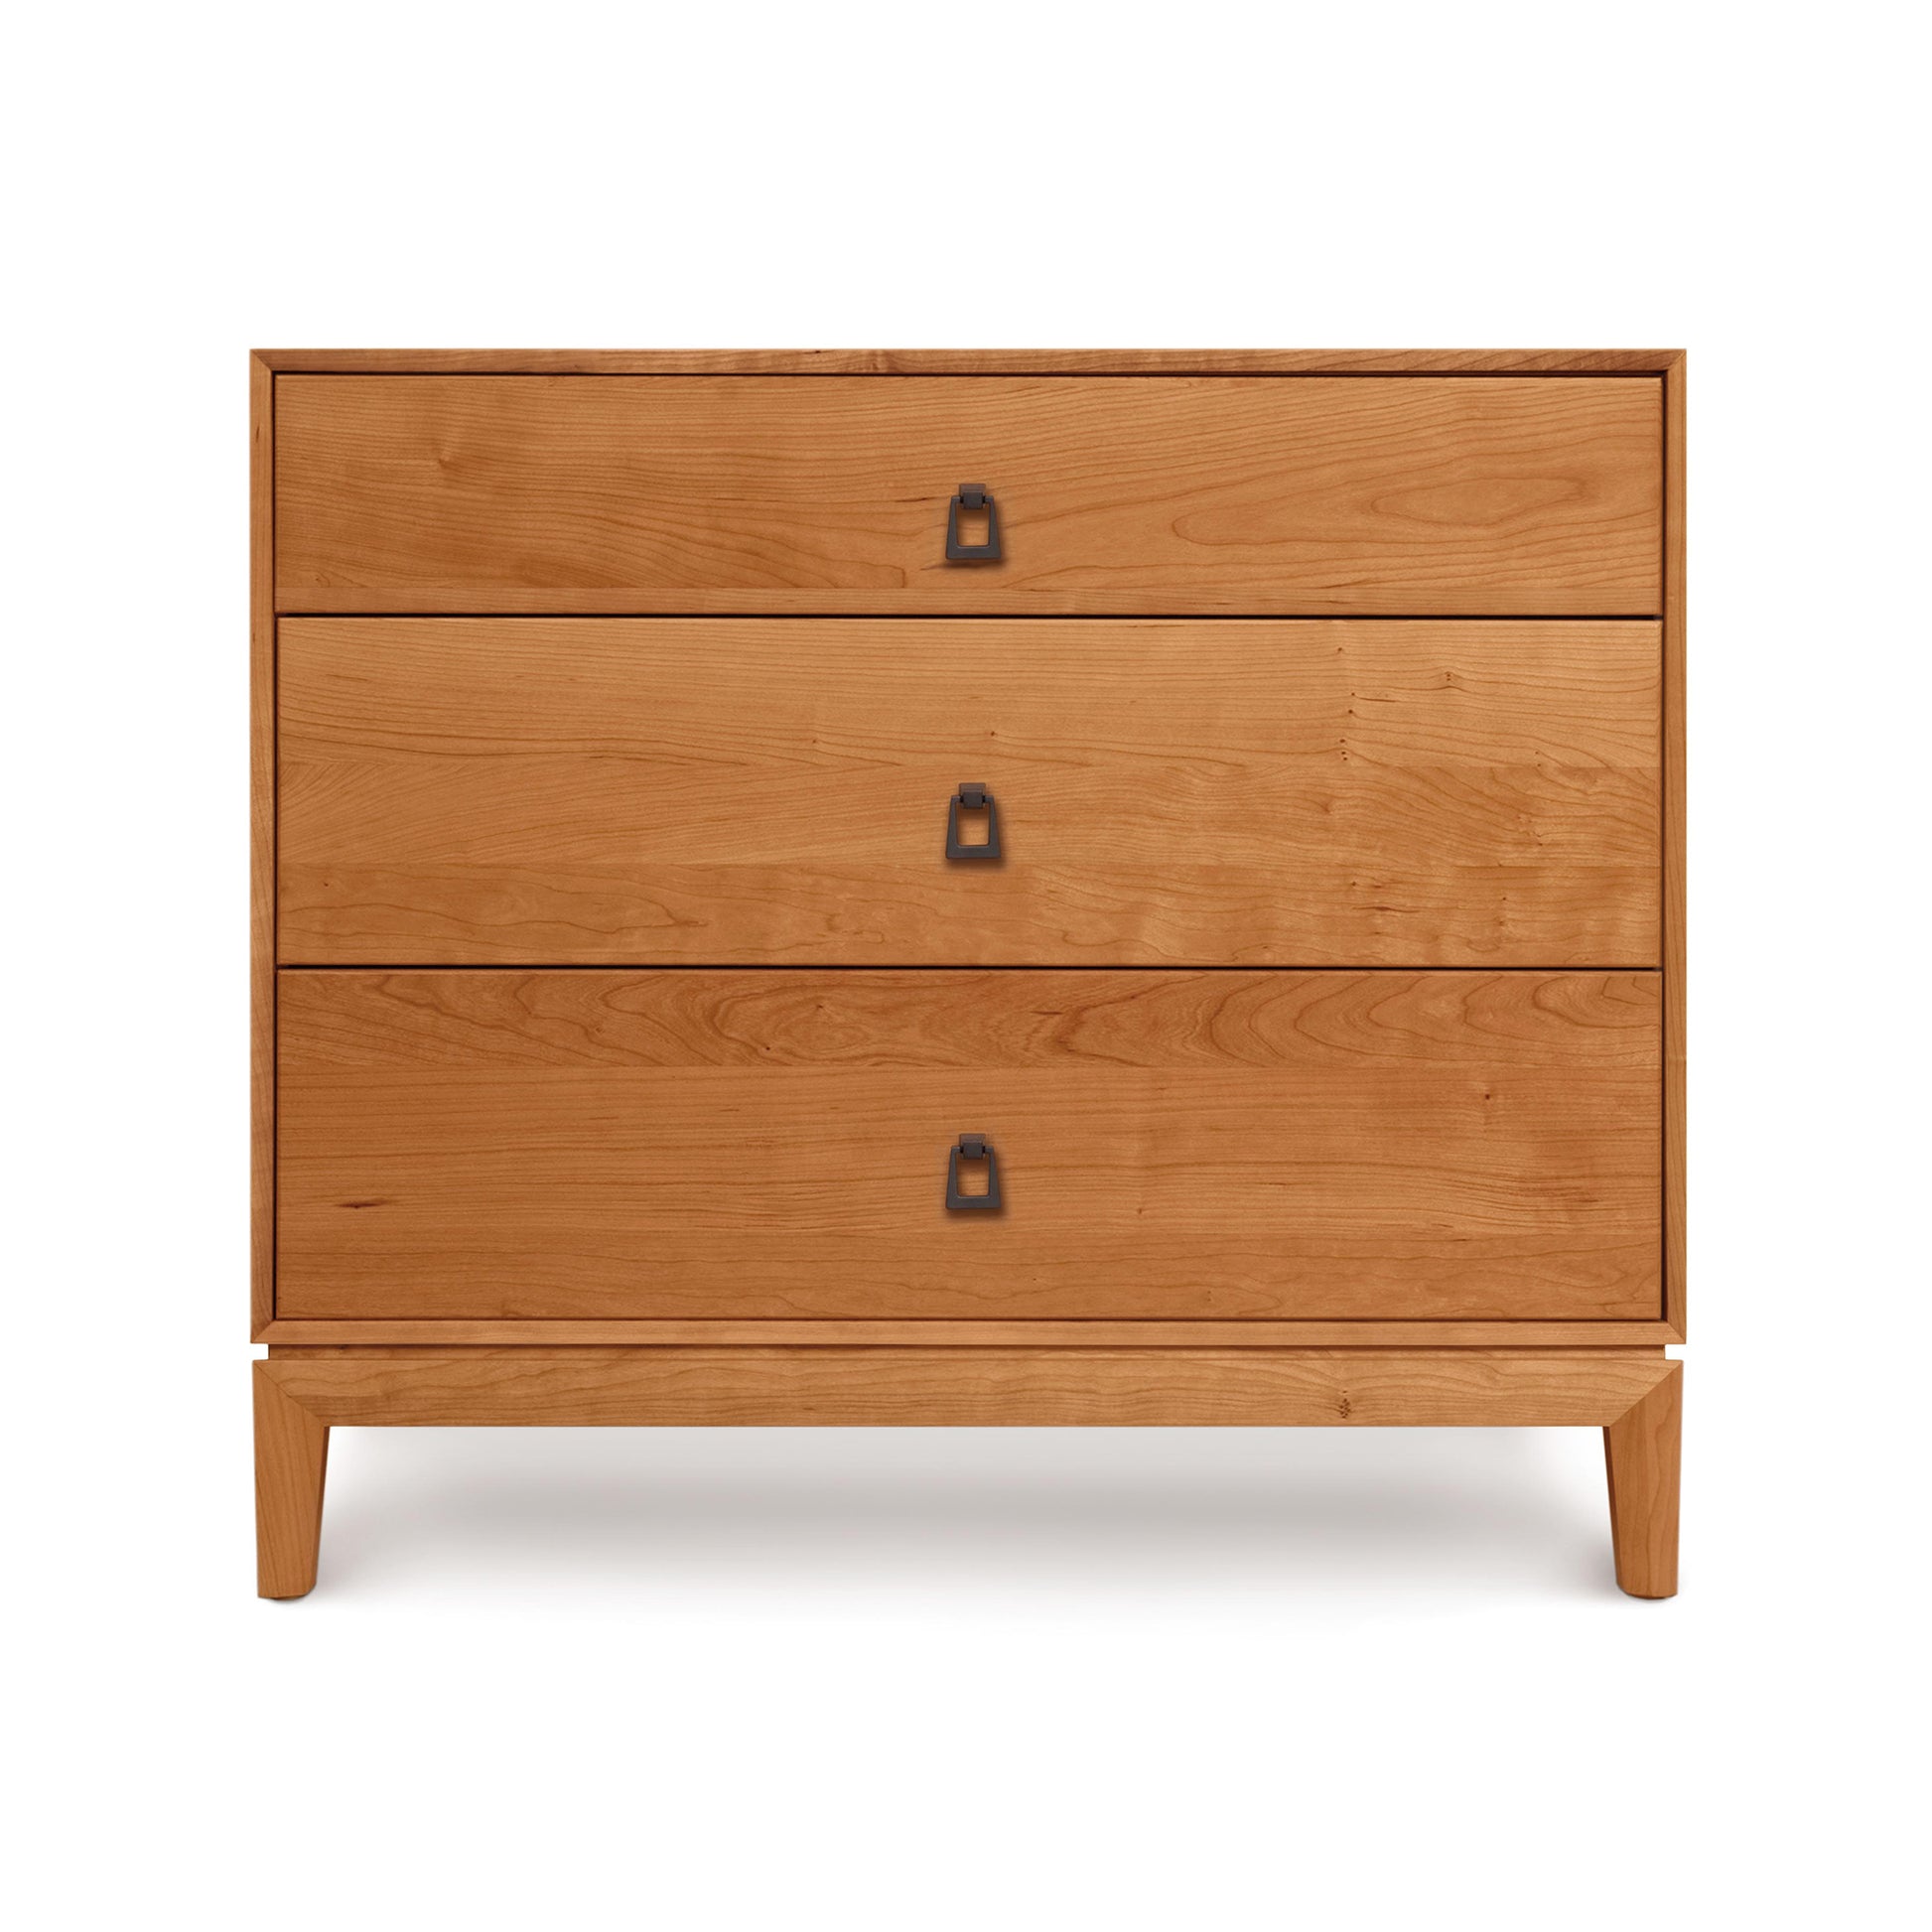 A Mansfield 3-Drawer Chest from Copeland Furniture, featuring a three-drawer dresser with metal handles on a white background.